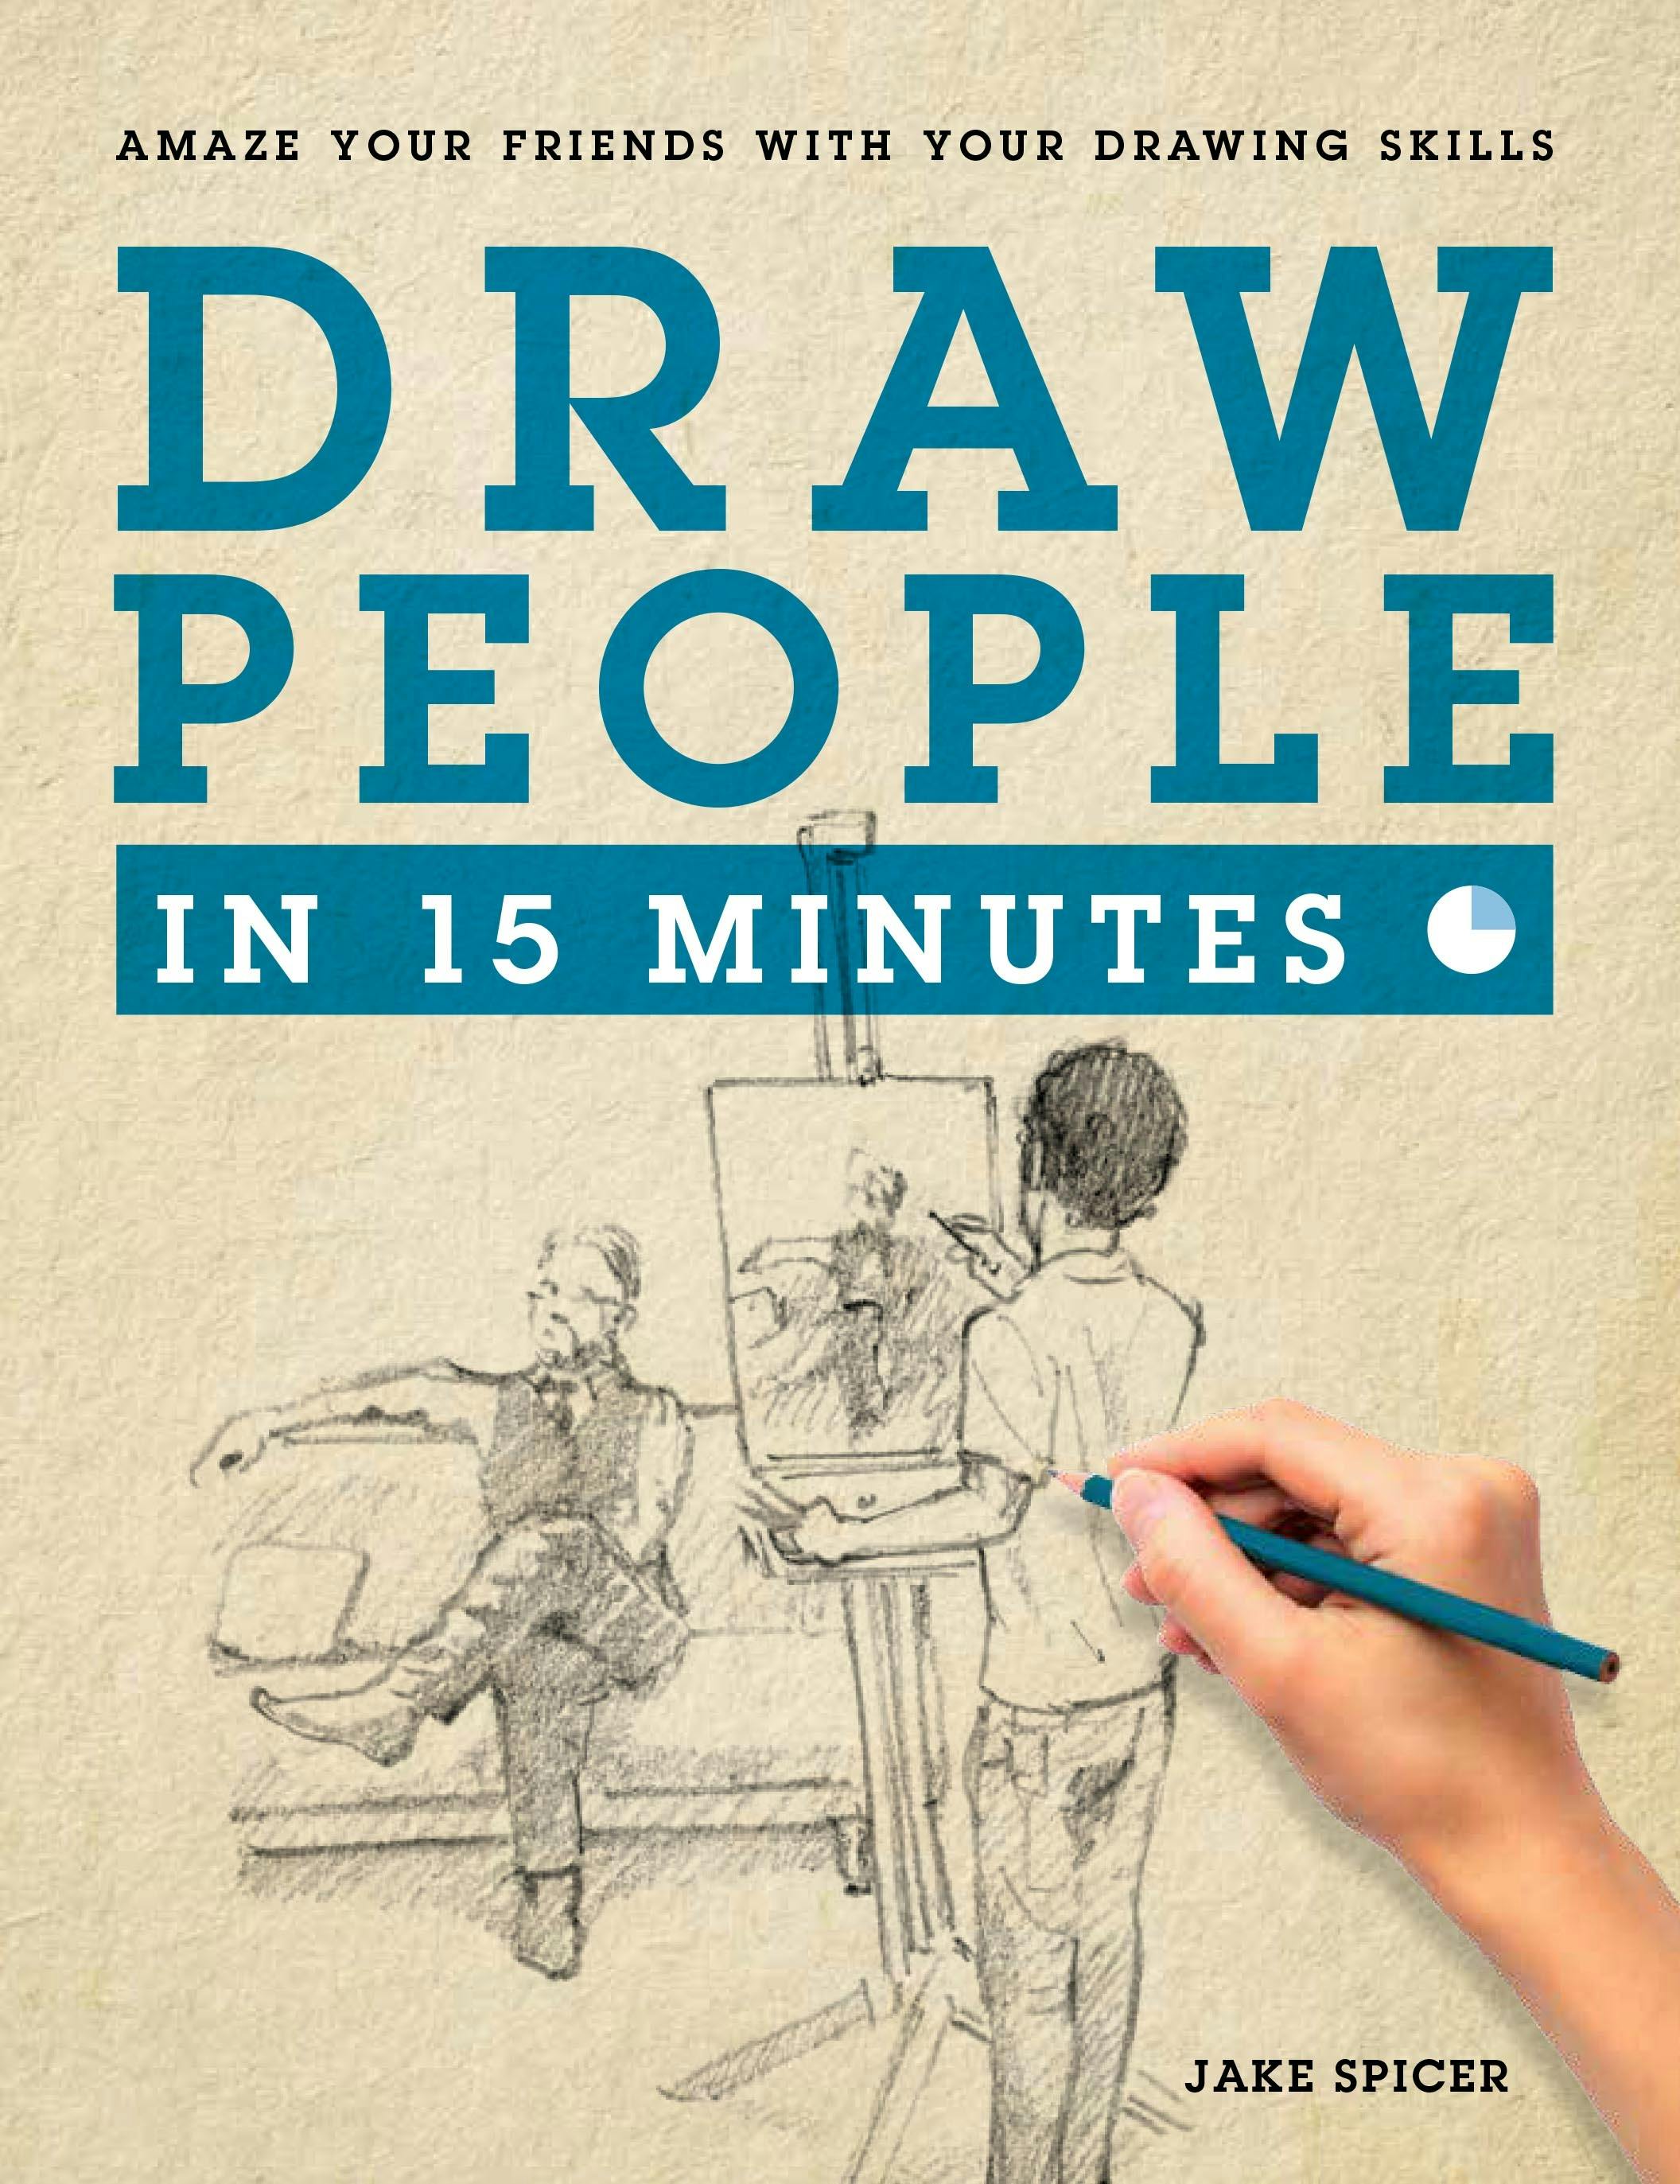 How to Draw People: 15 Tips on How to Draw a Person - Artists Network